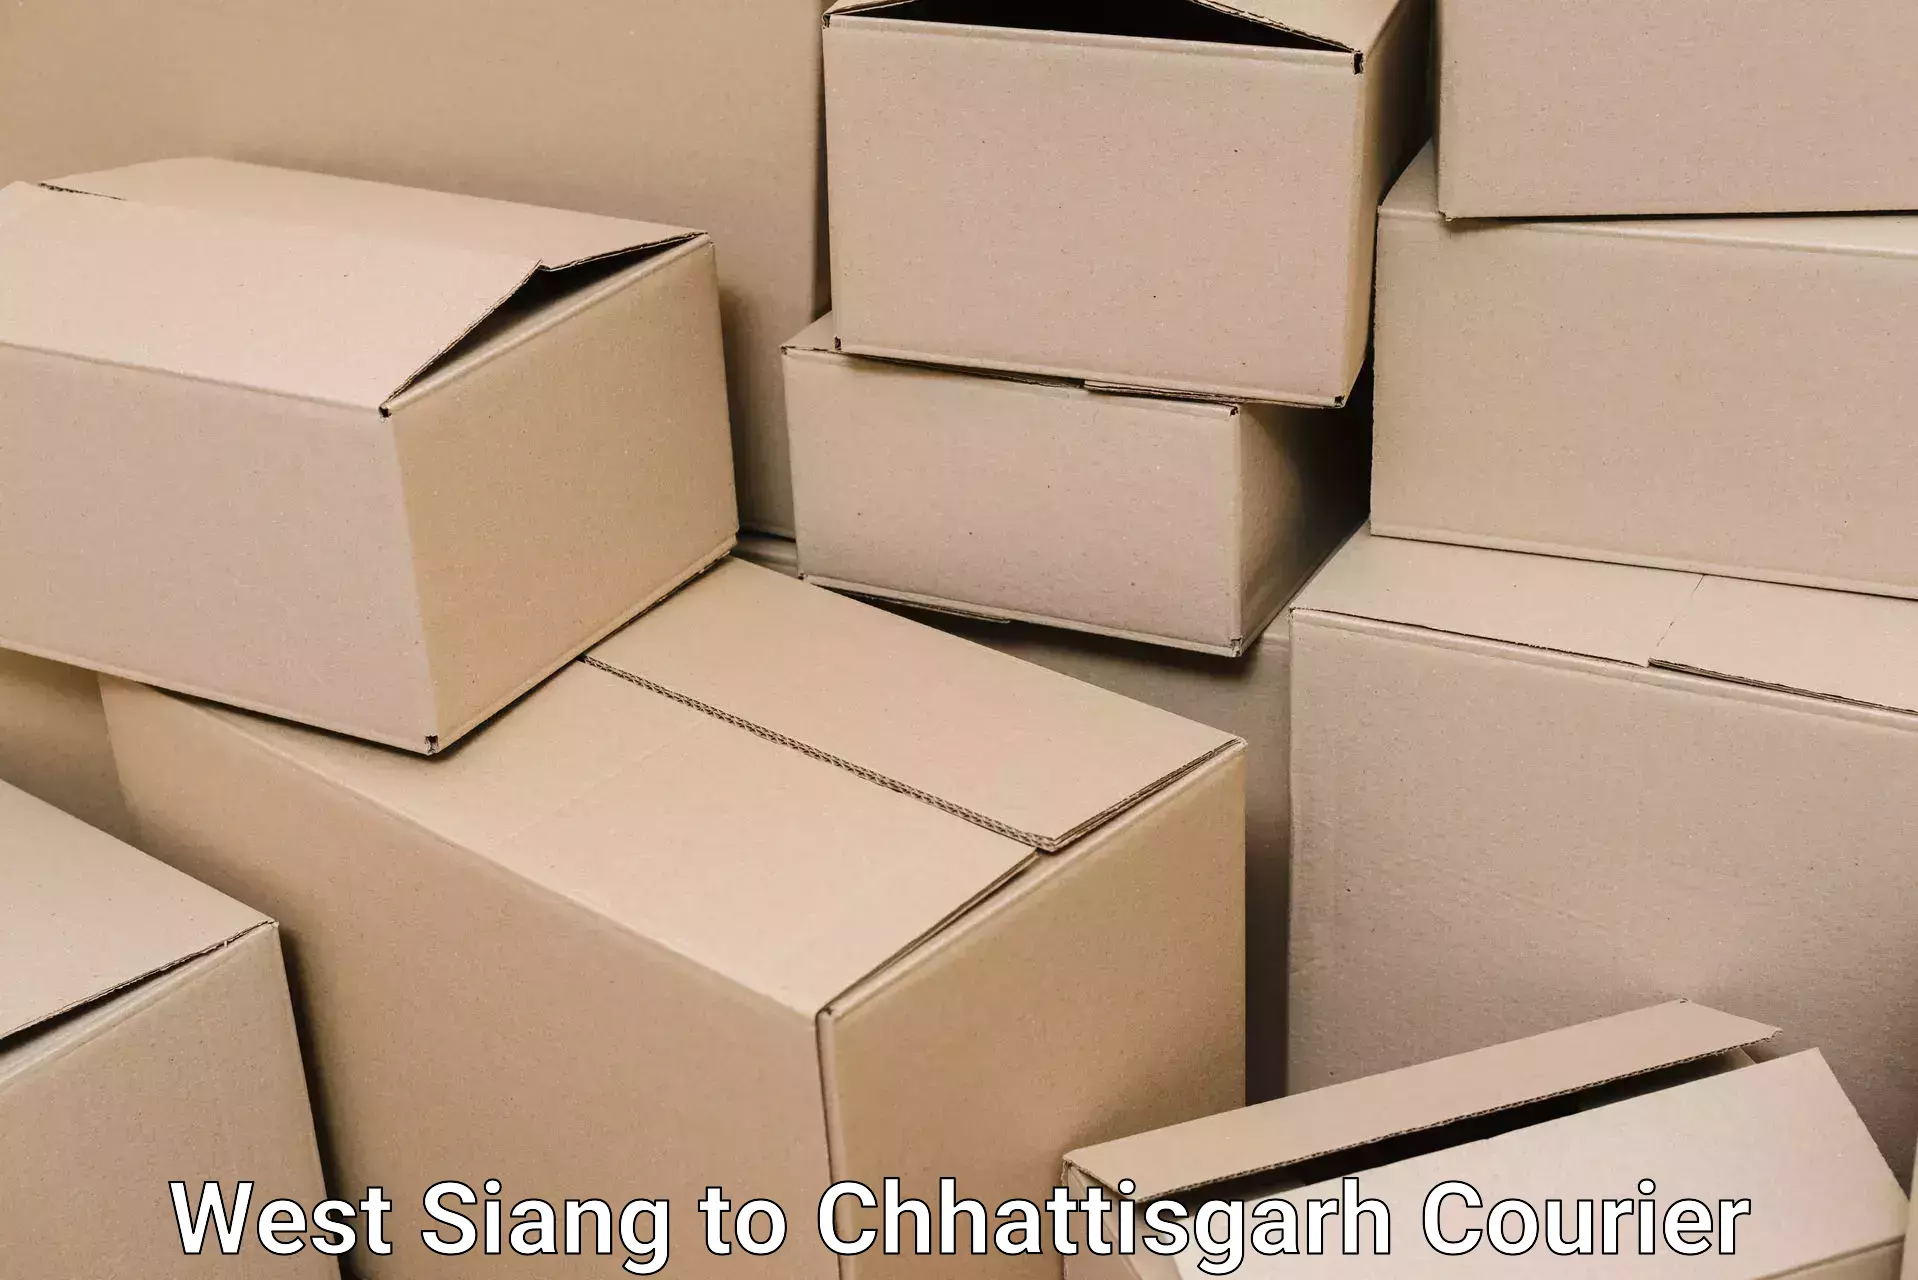 Nationwide furniture transport West Siang to Berla